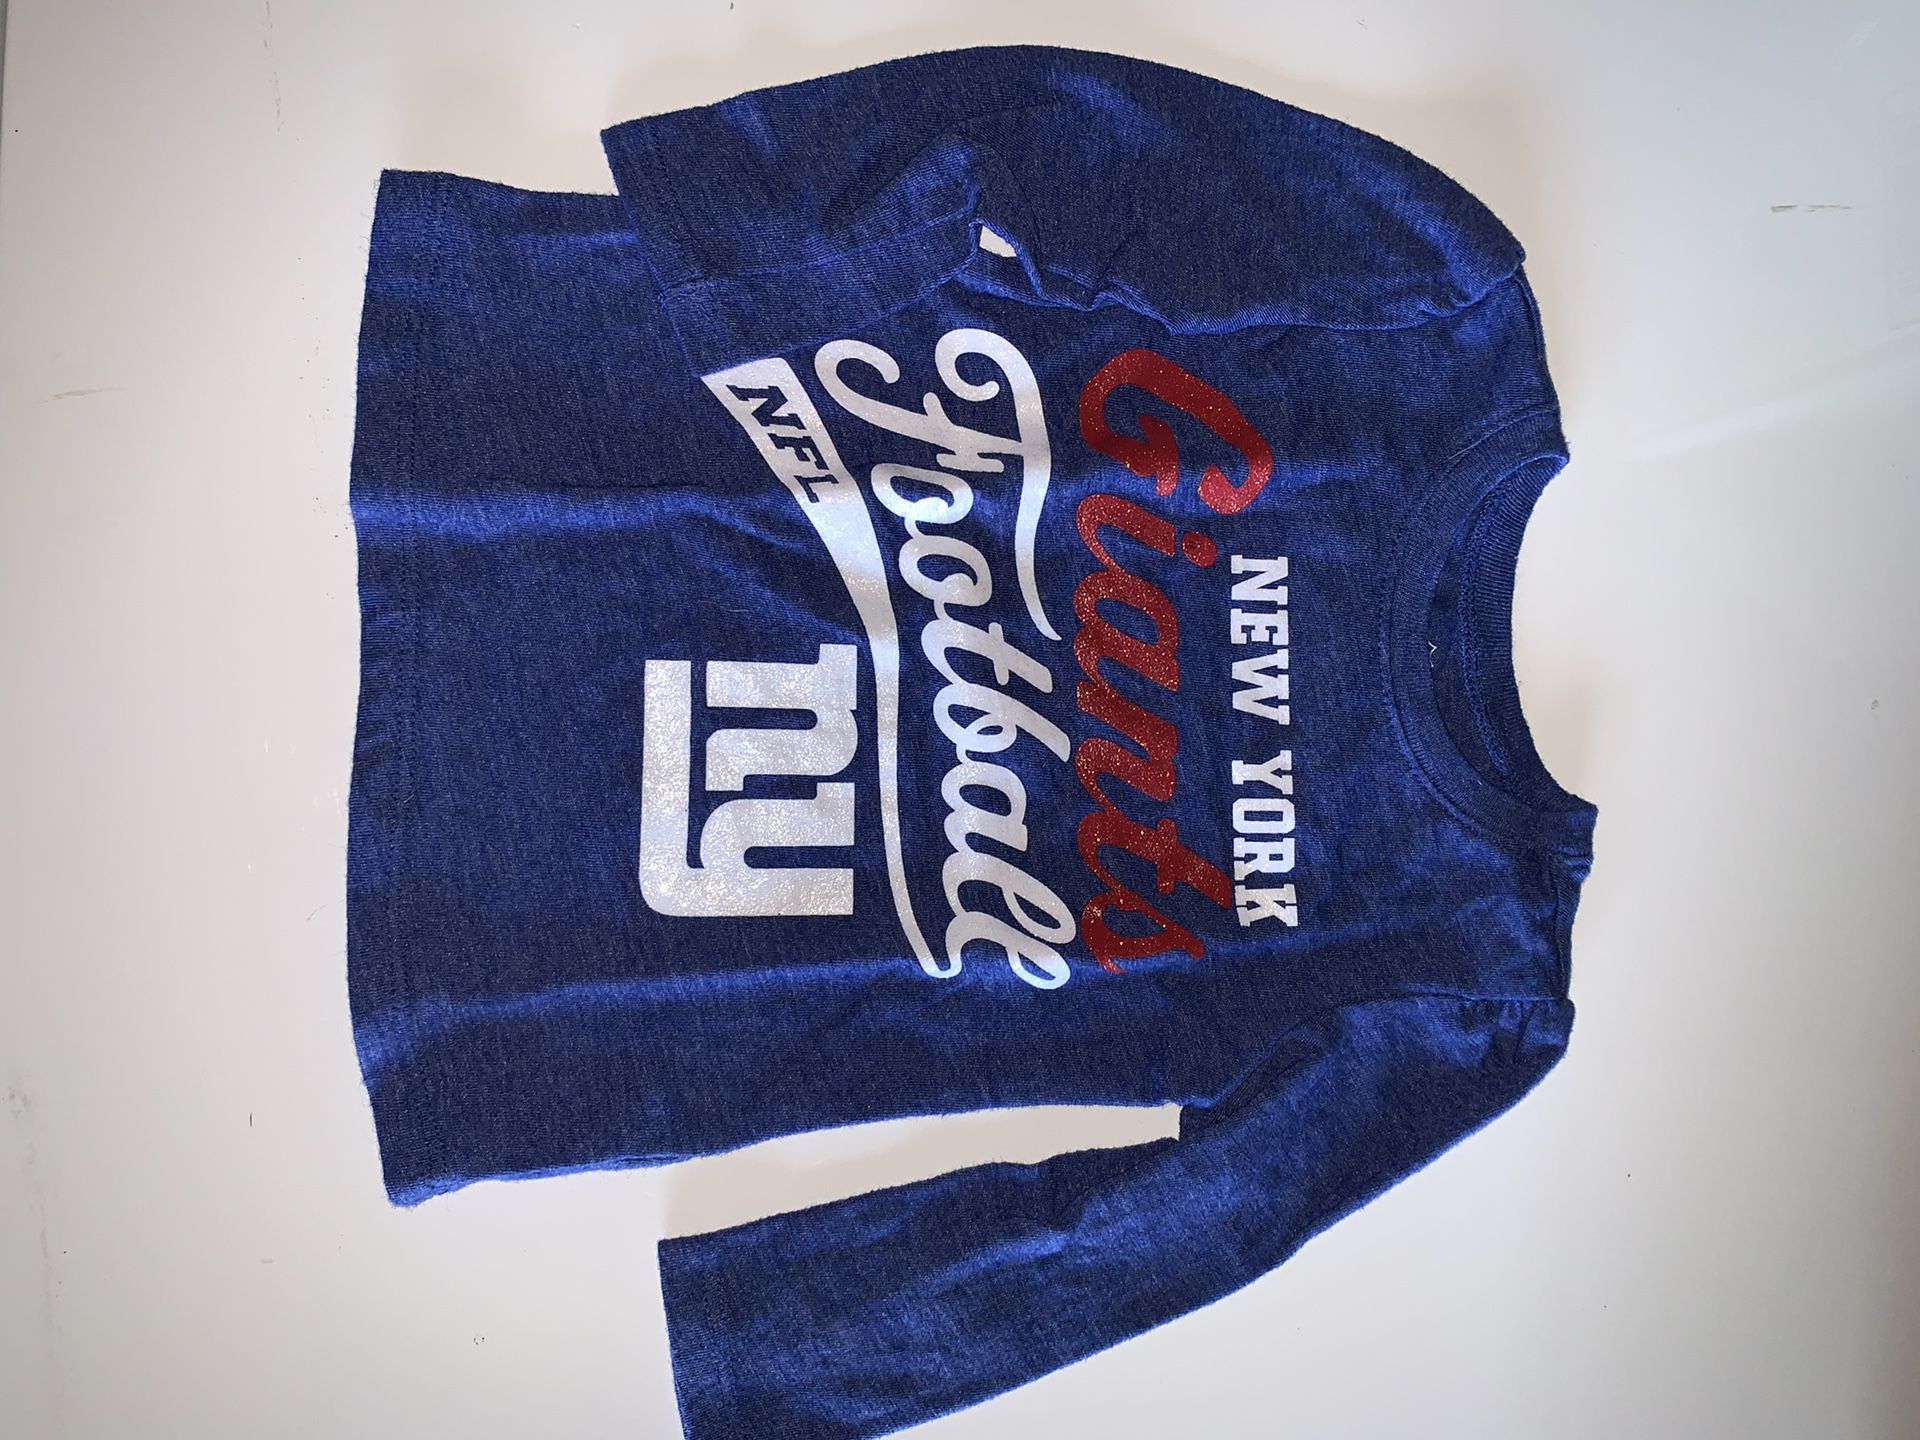 Ny giants shirt 12-18 months